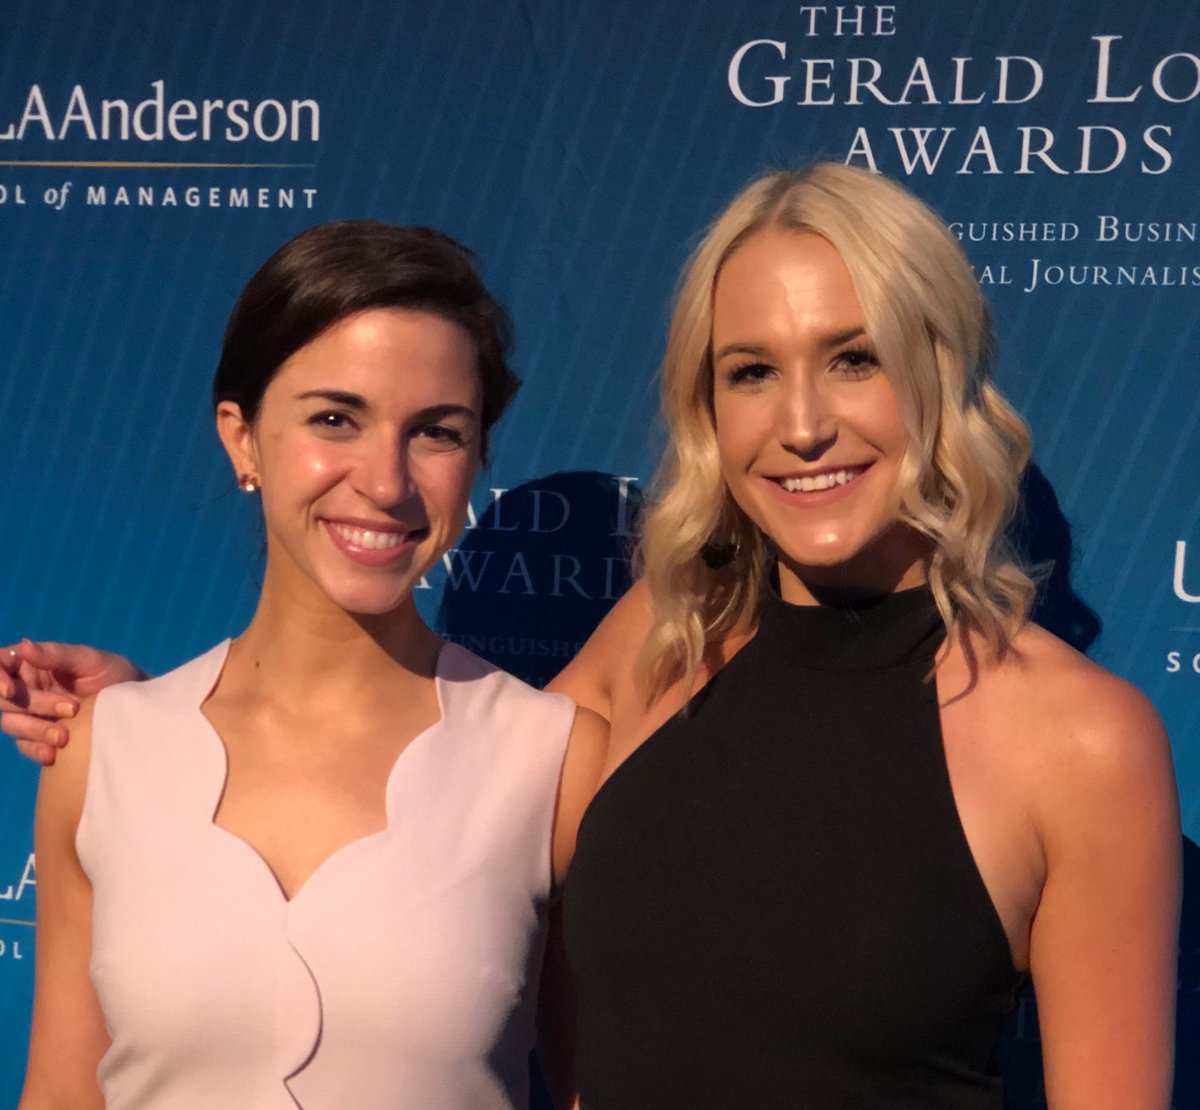 Leslie Picker was one of the finalists of The Gerald Loeb Awards in 2018